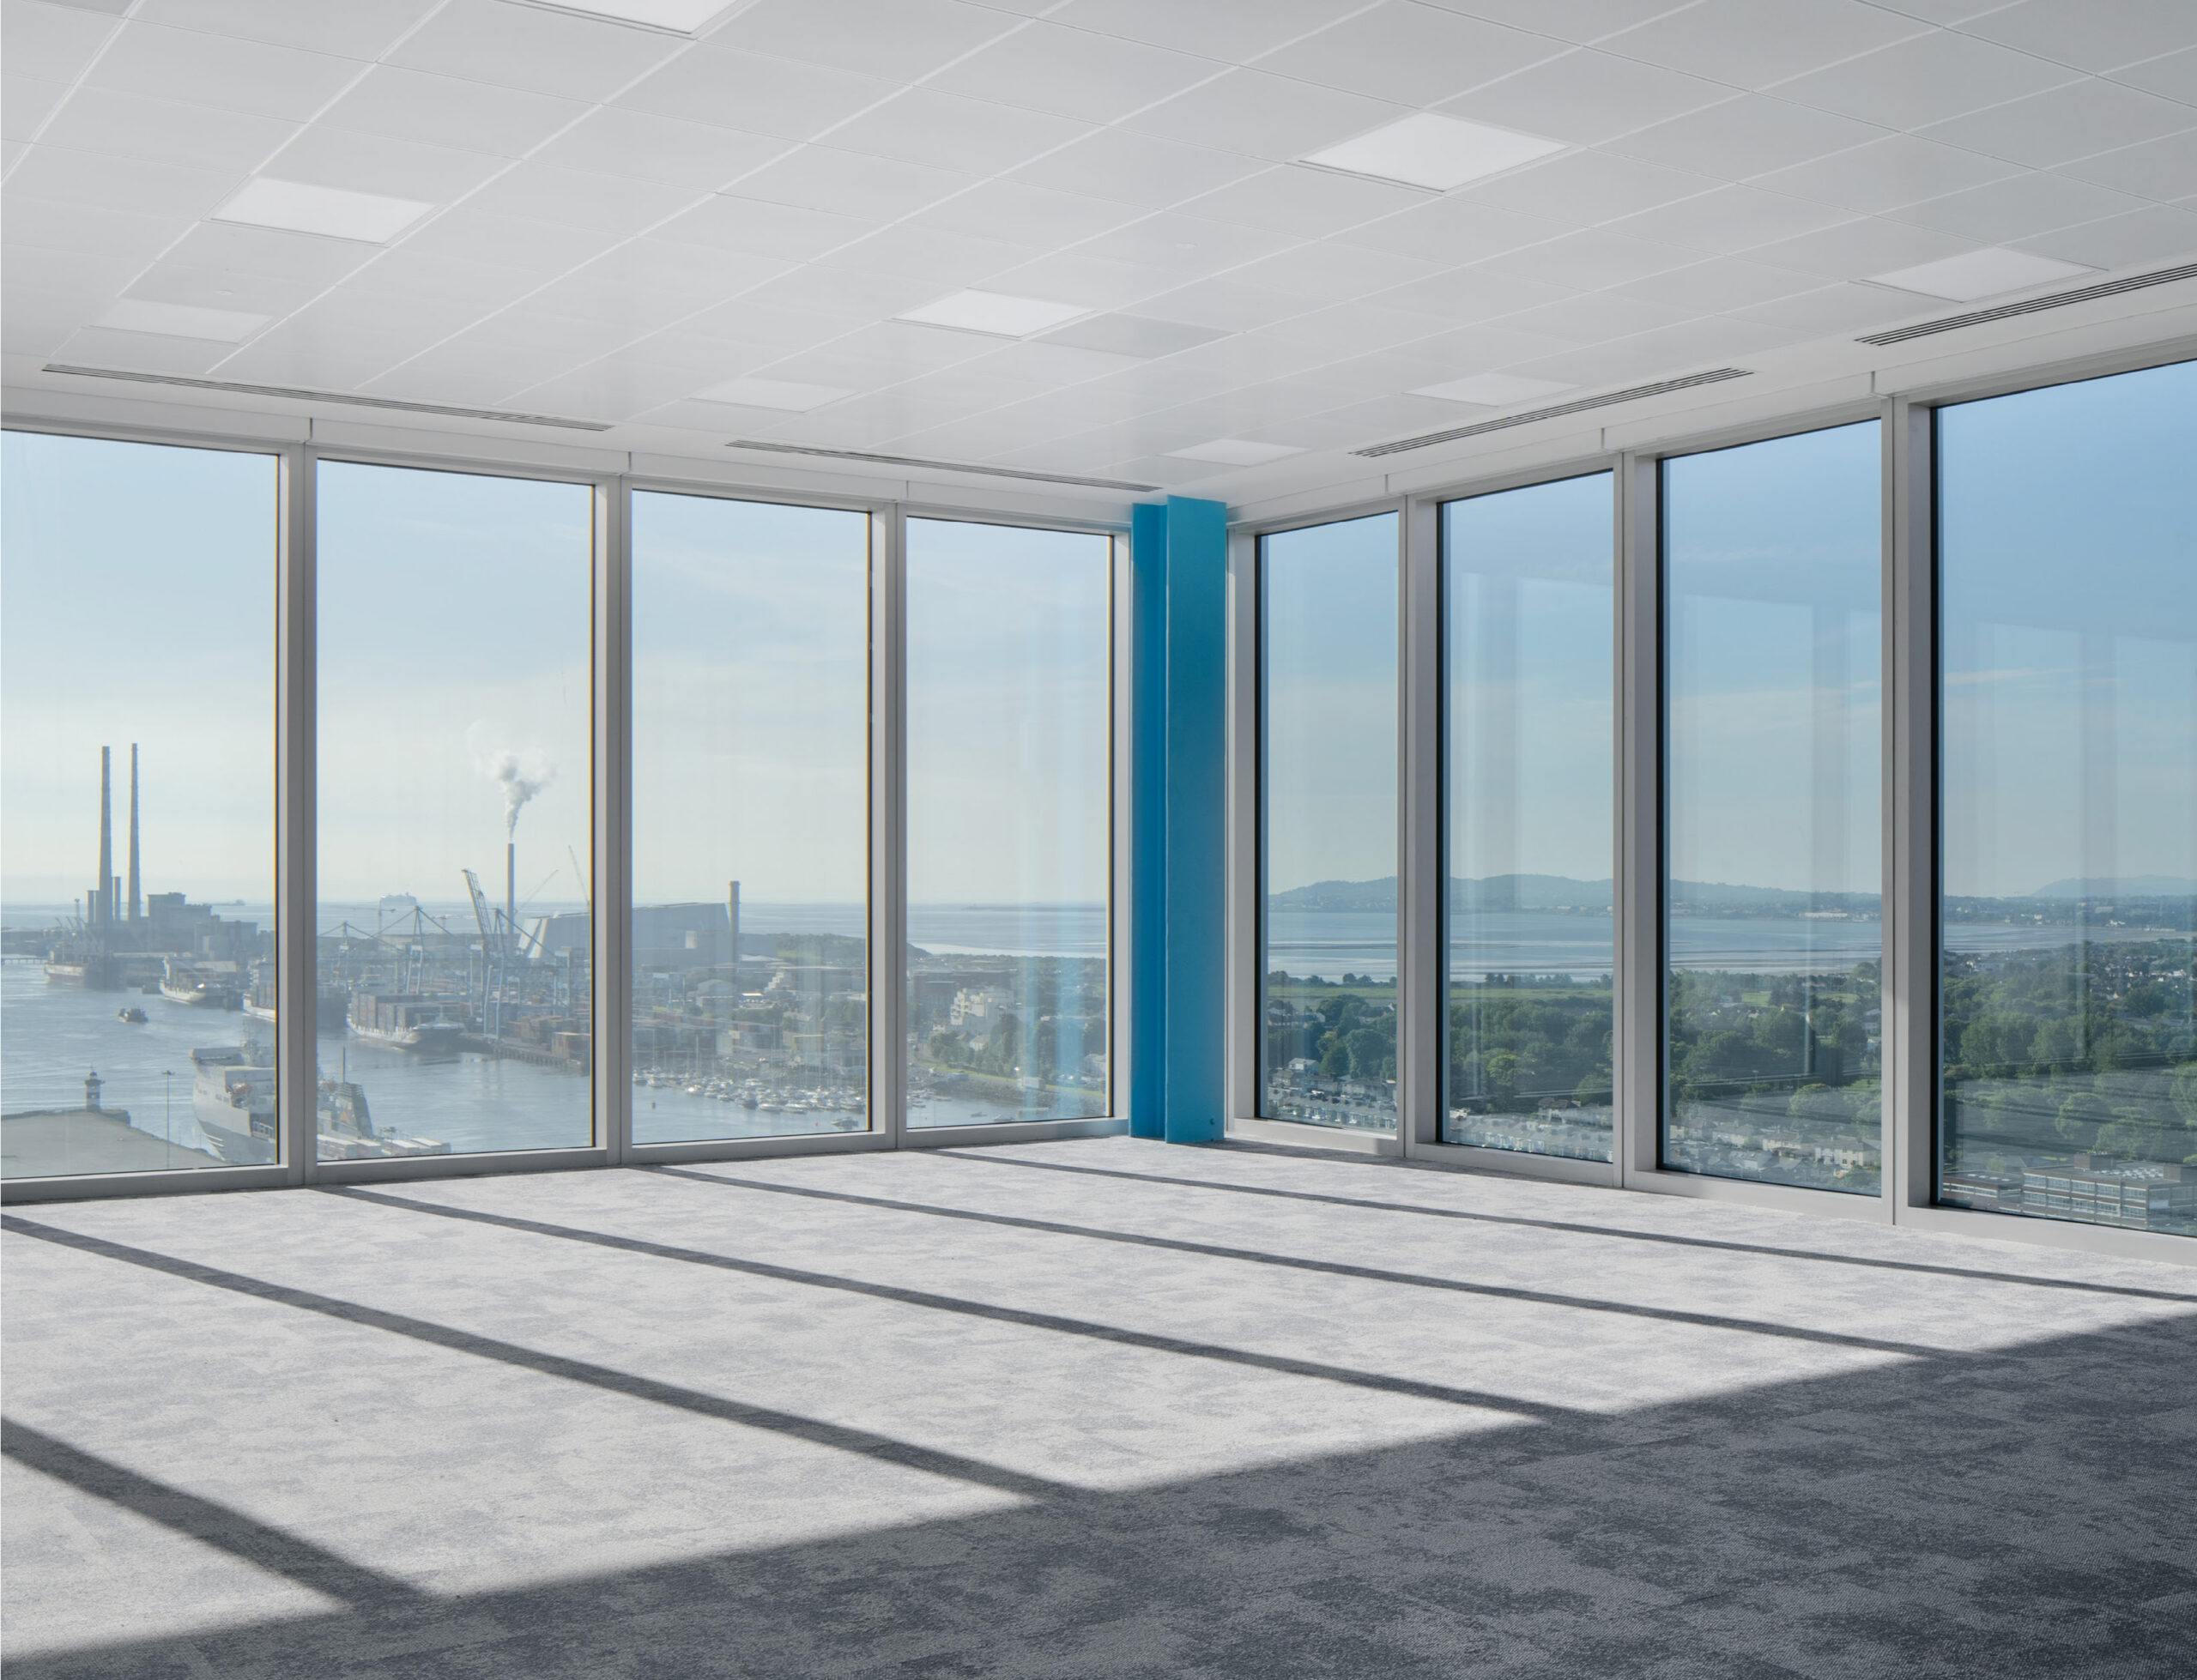 View from inside the Level 17 of building with tall windows overlooking East towards Dublin Bay